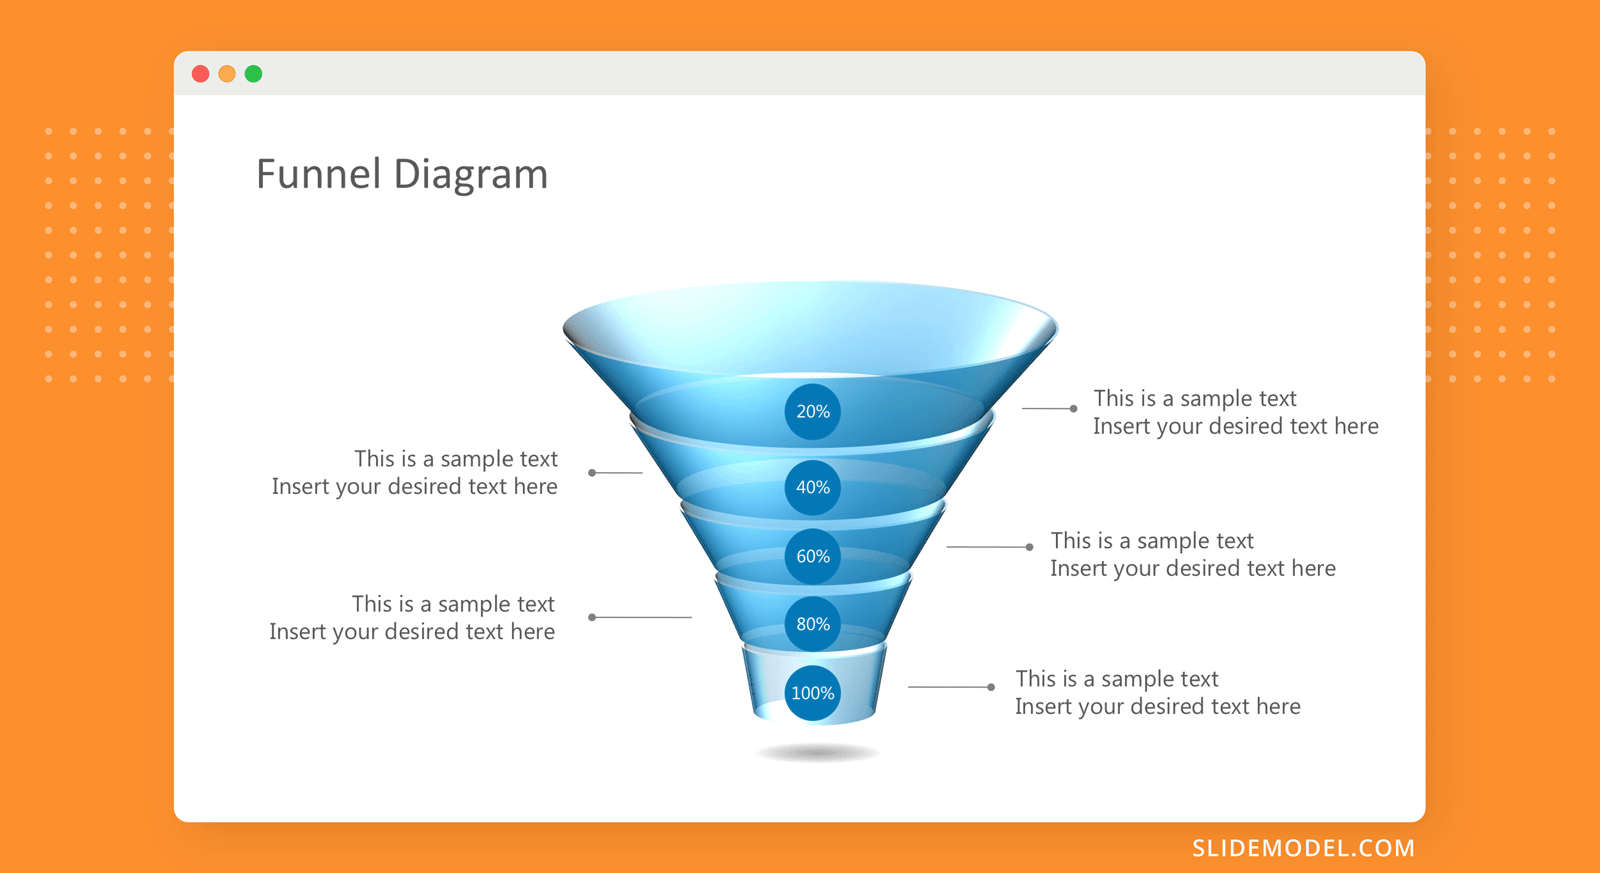 Funnel Diagram for PowerPoint